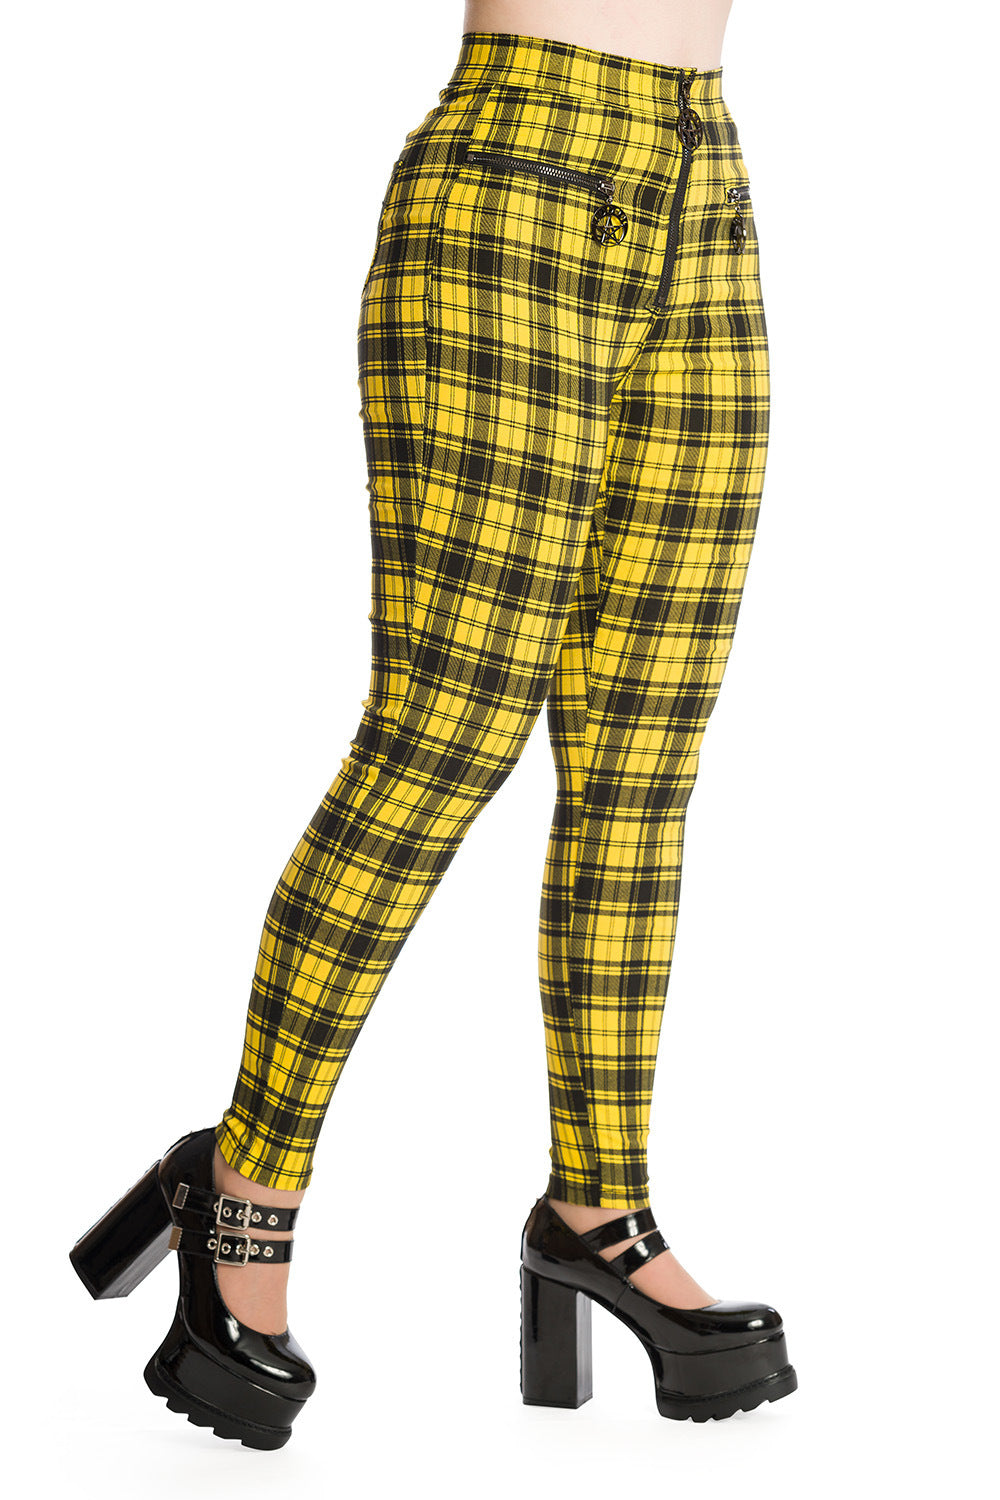 Check Tartan Skinny Jean Drainpipes in Various Colours by Banned  Alternative – Banned Alternative